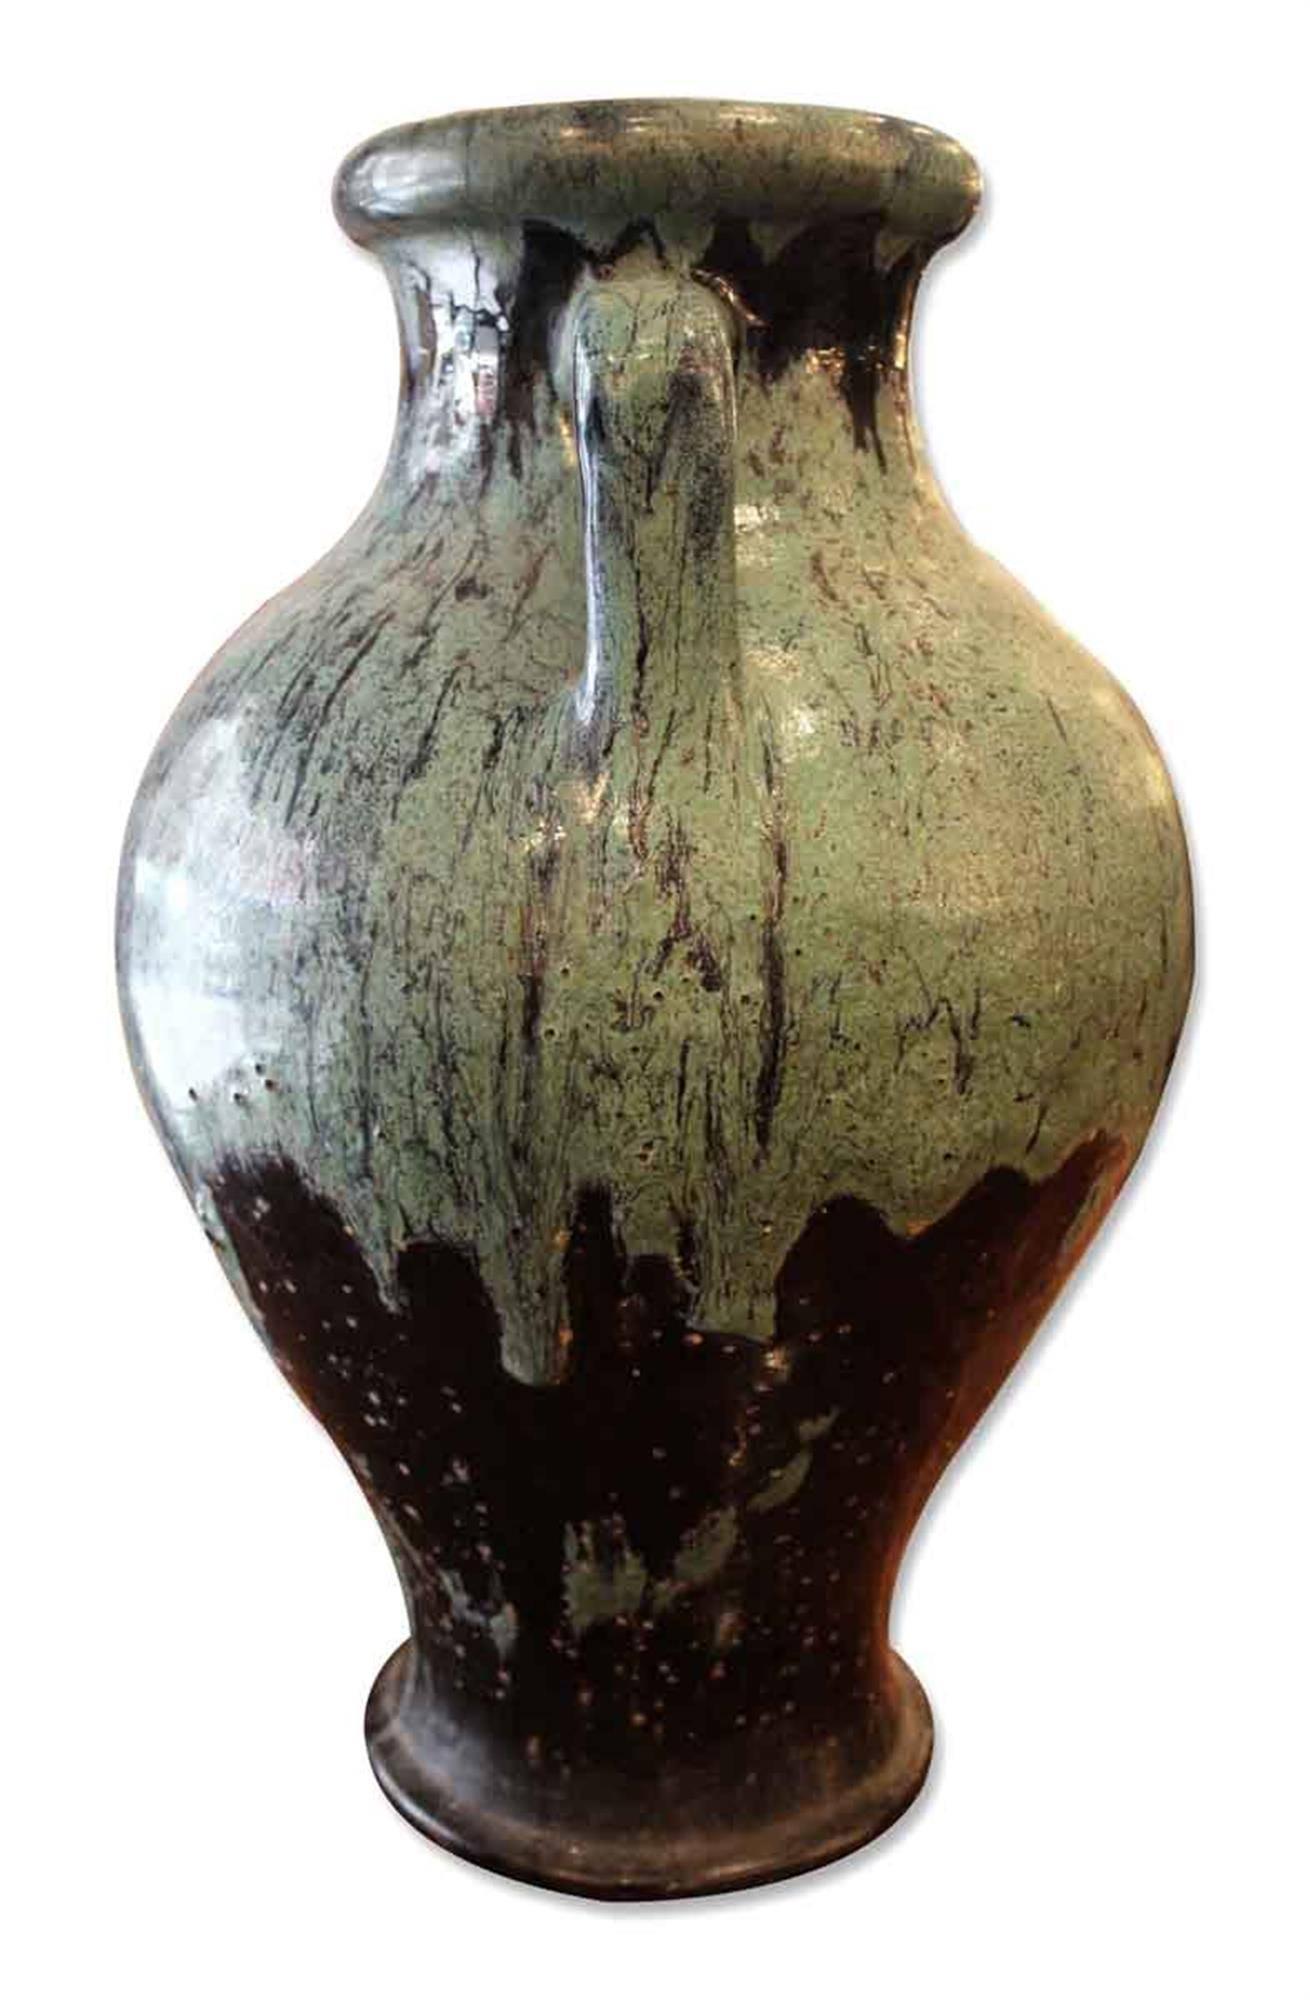 Hand thrown stone urn or vase with applied handles and drips breaking into a blue green color. This can be seen at our 400 Gilligan St location in Scranton, PA.